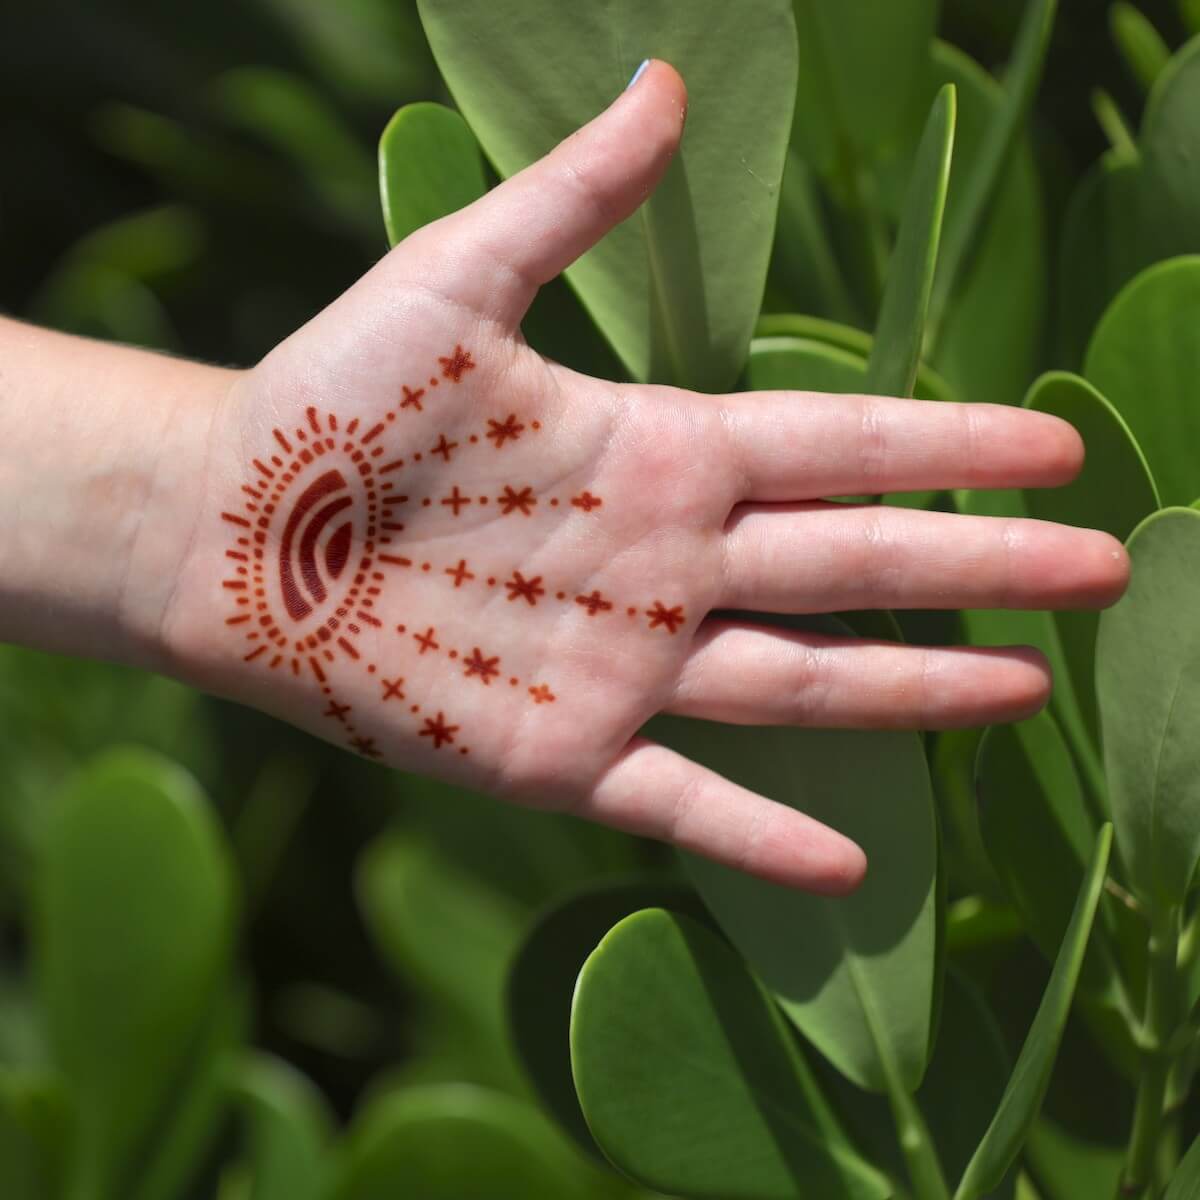 Starry Eyes - palm henna tattoo of eye surrounded by stars 